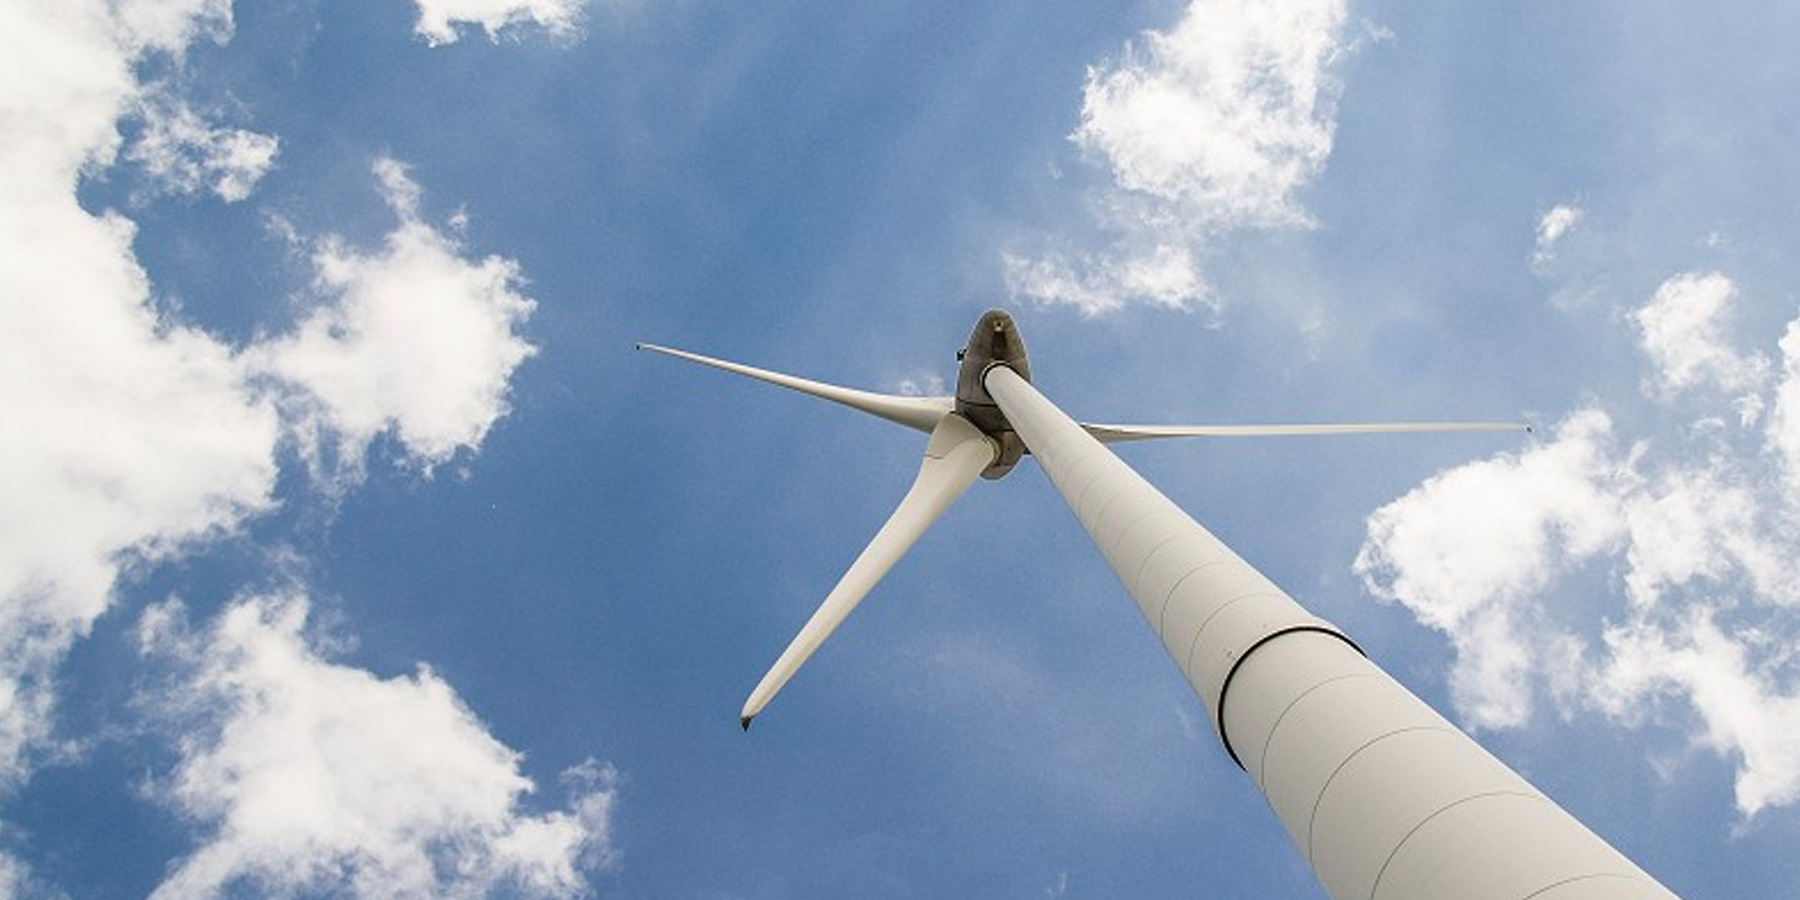 How does a wind turbine work? - Action Renewables